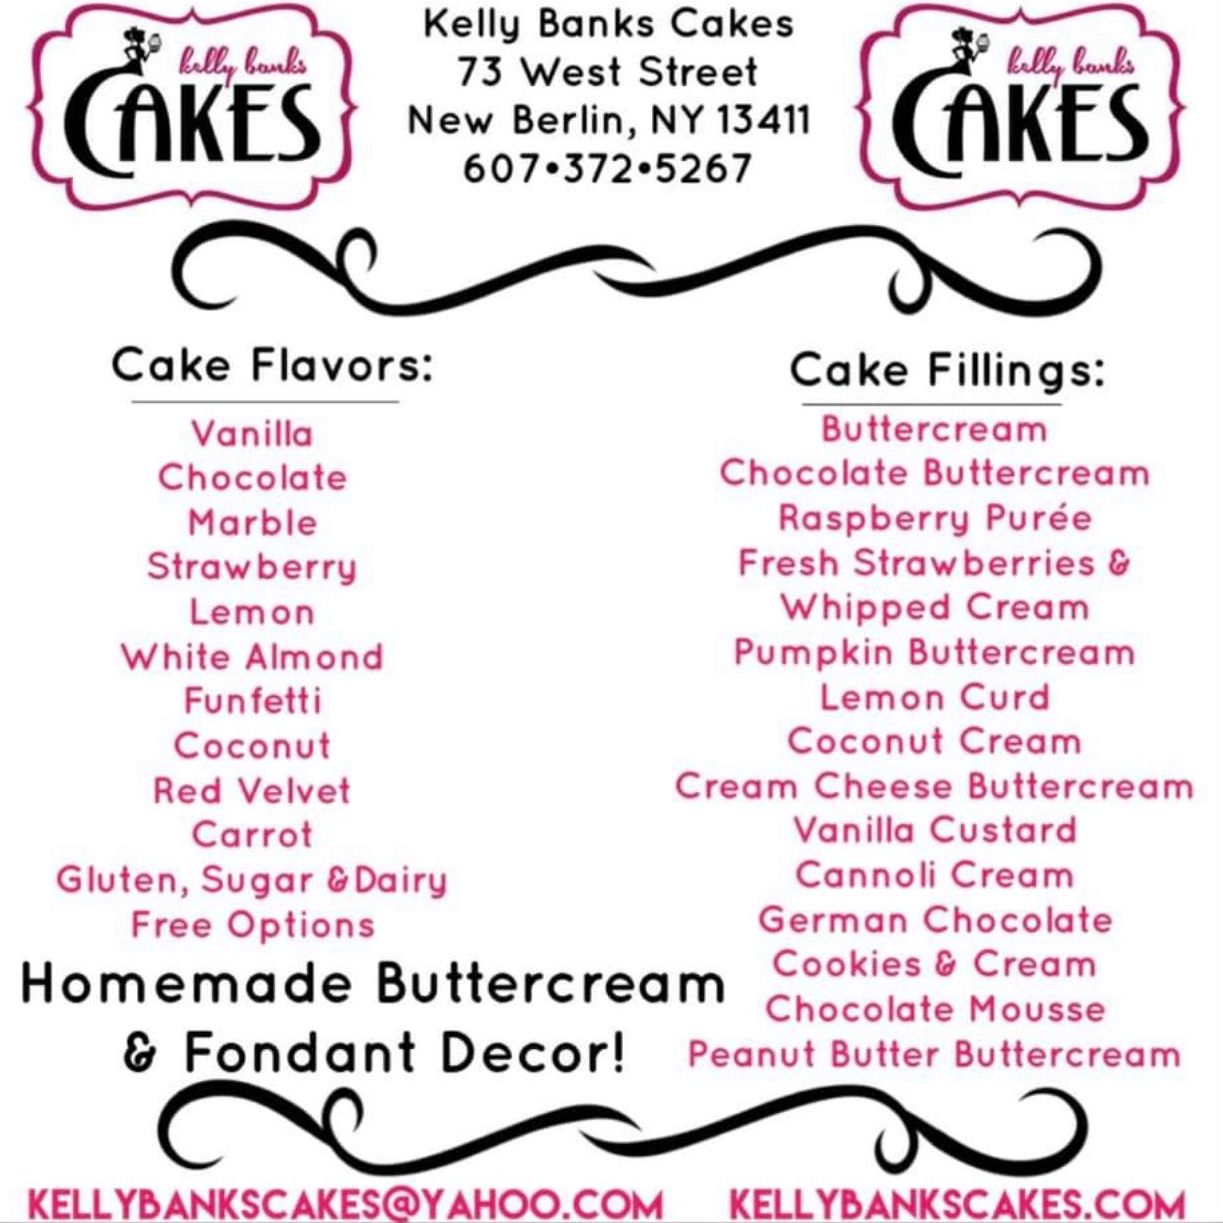 Different Types Of Cakes: Butter, Foam, & More - Belmar Bakery